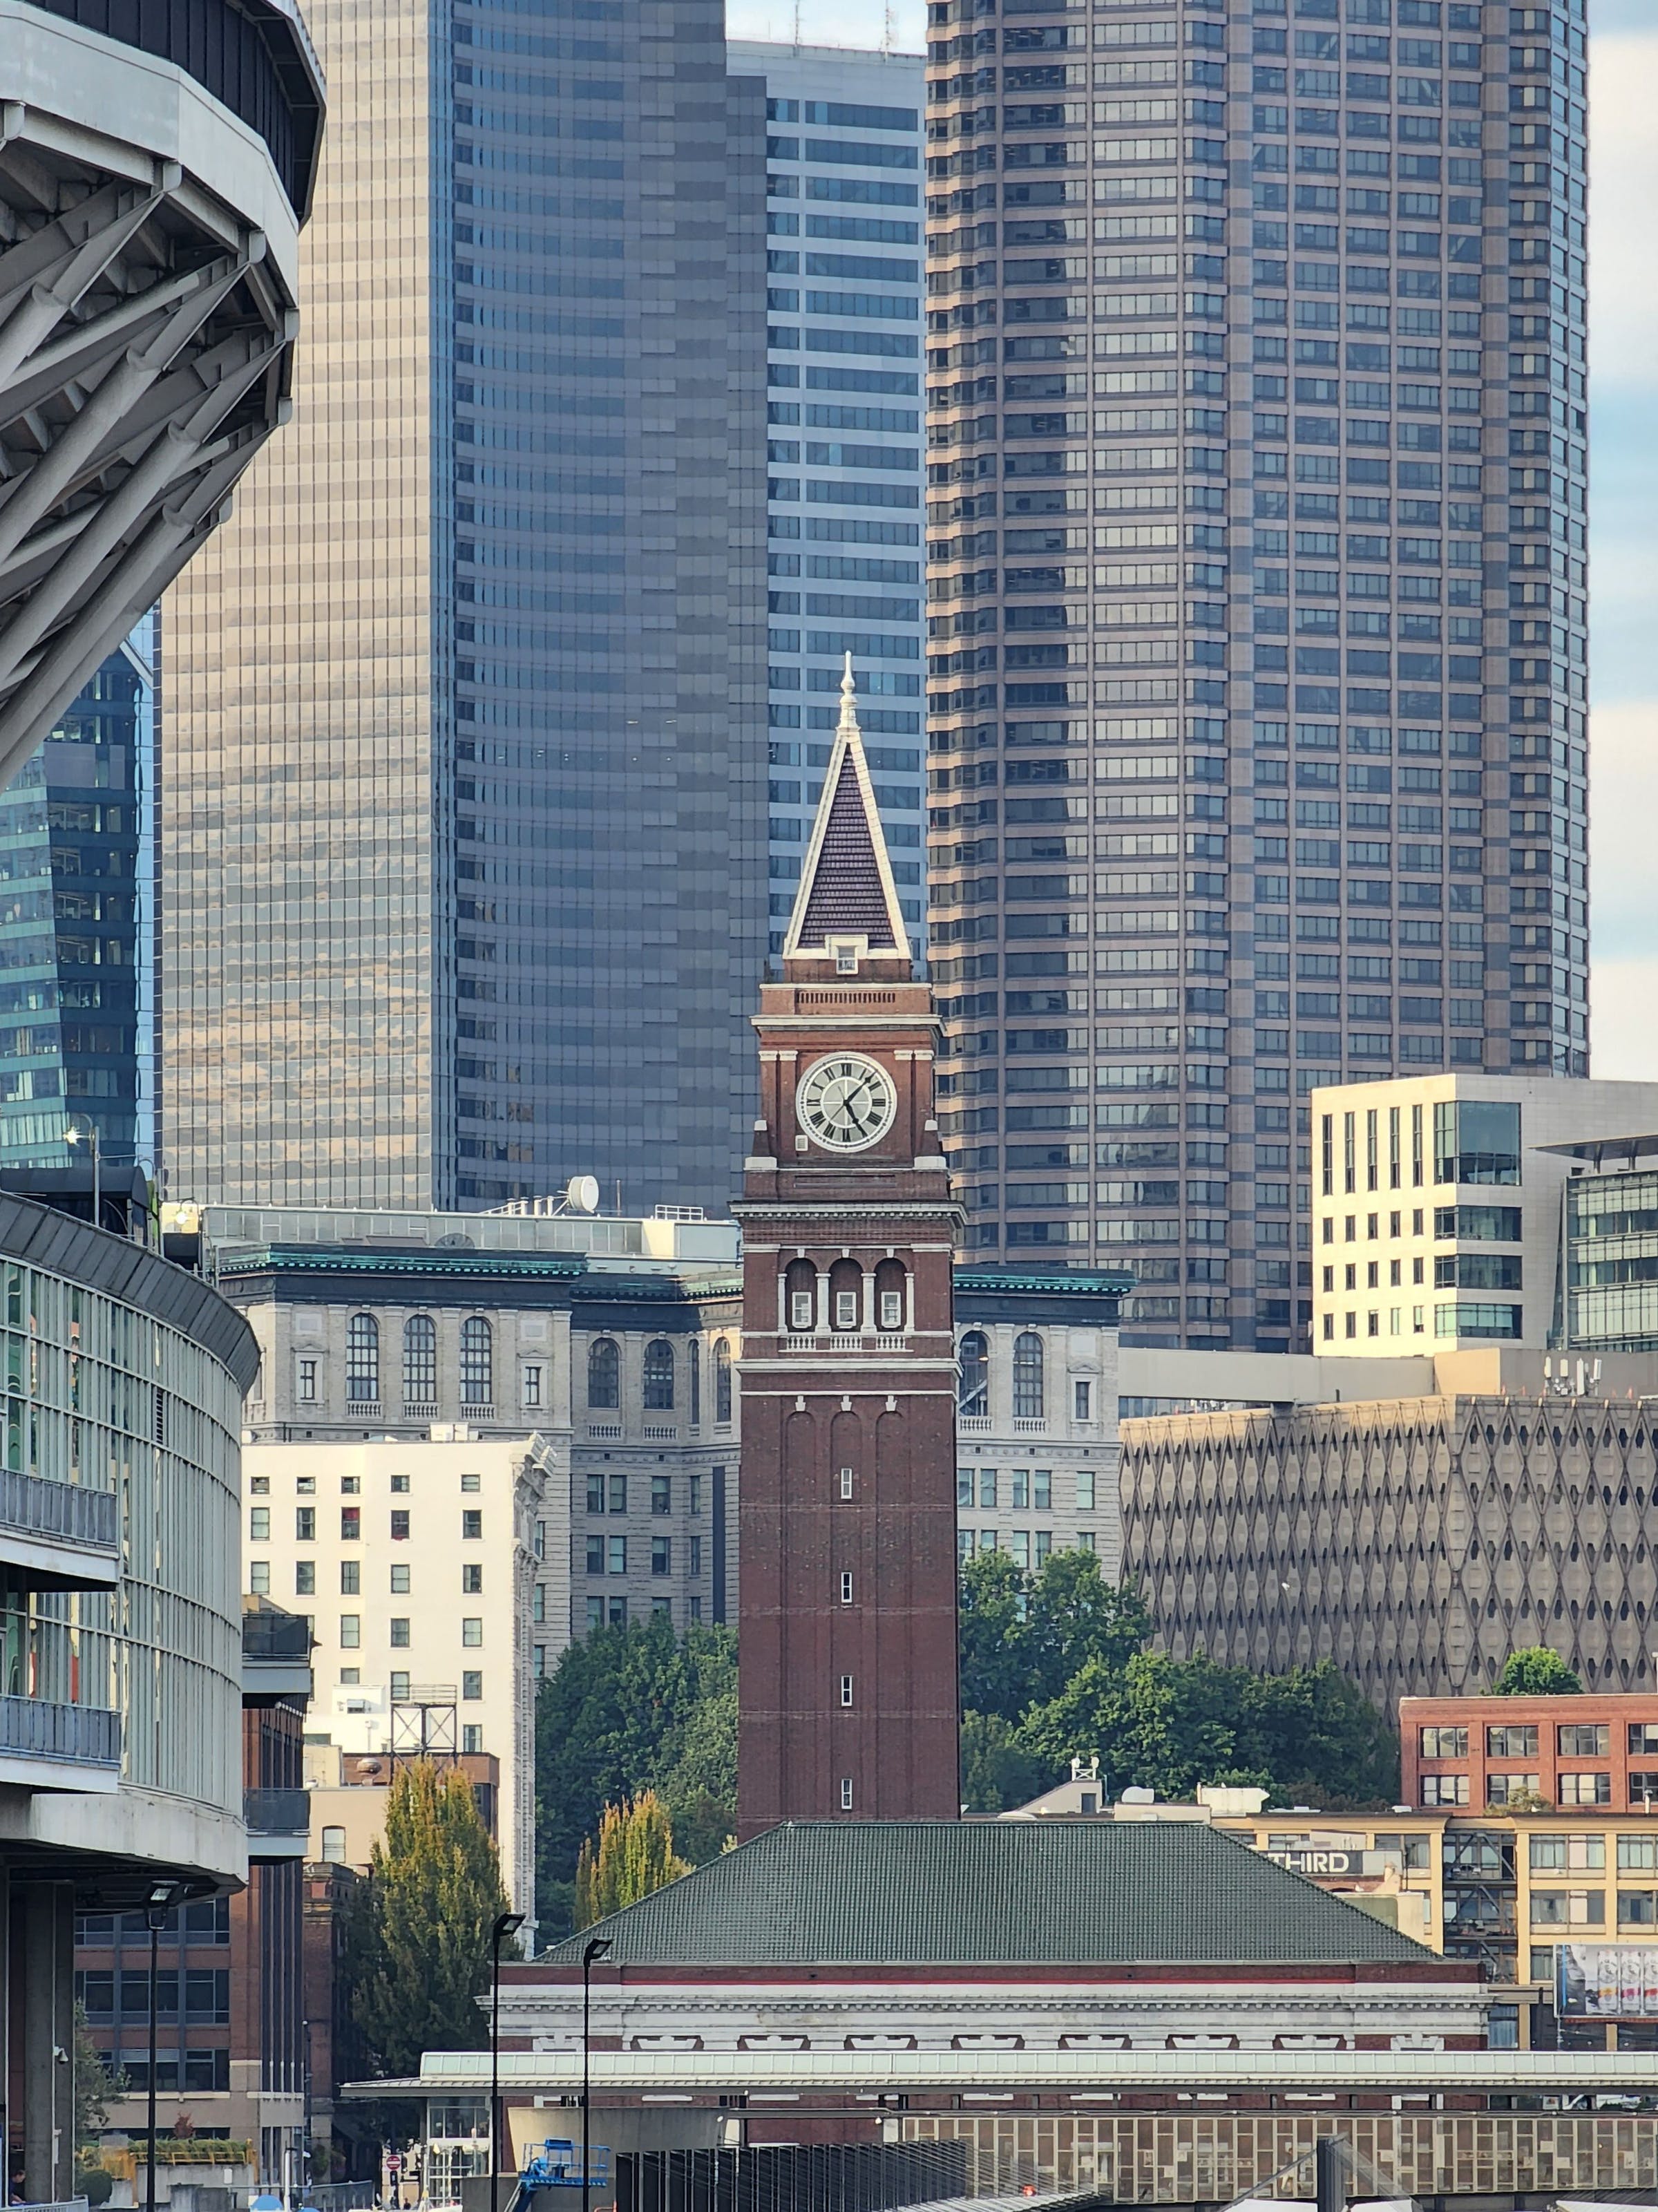 Buildings and a clock tower in downtown Seattle.